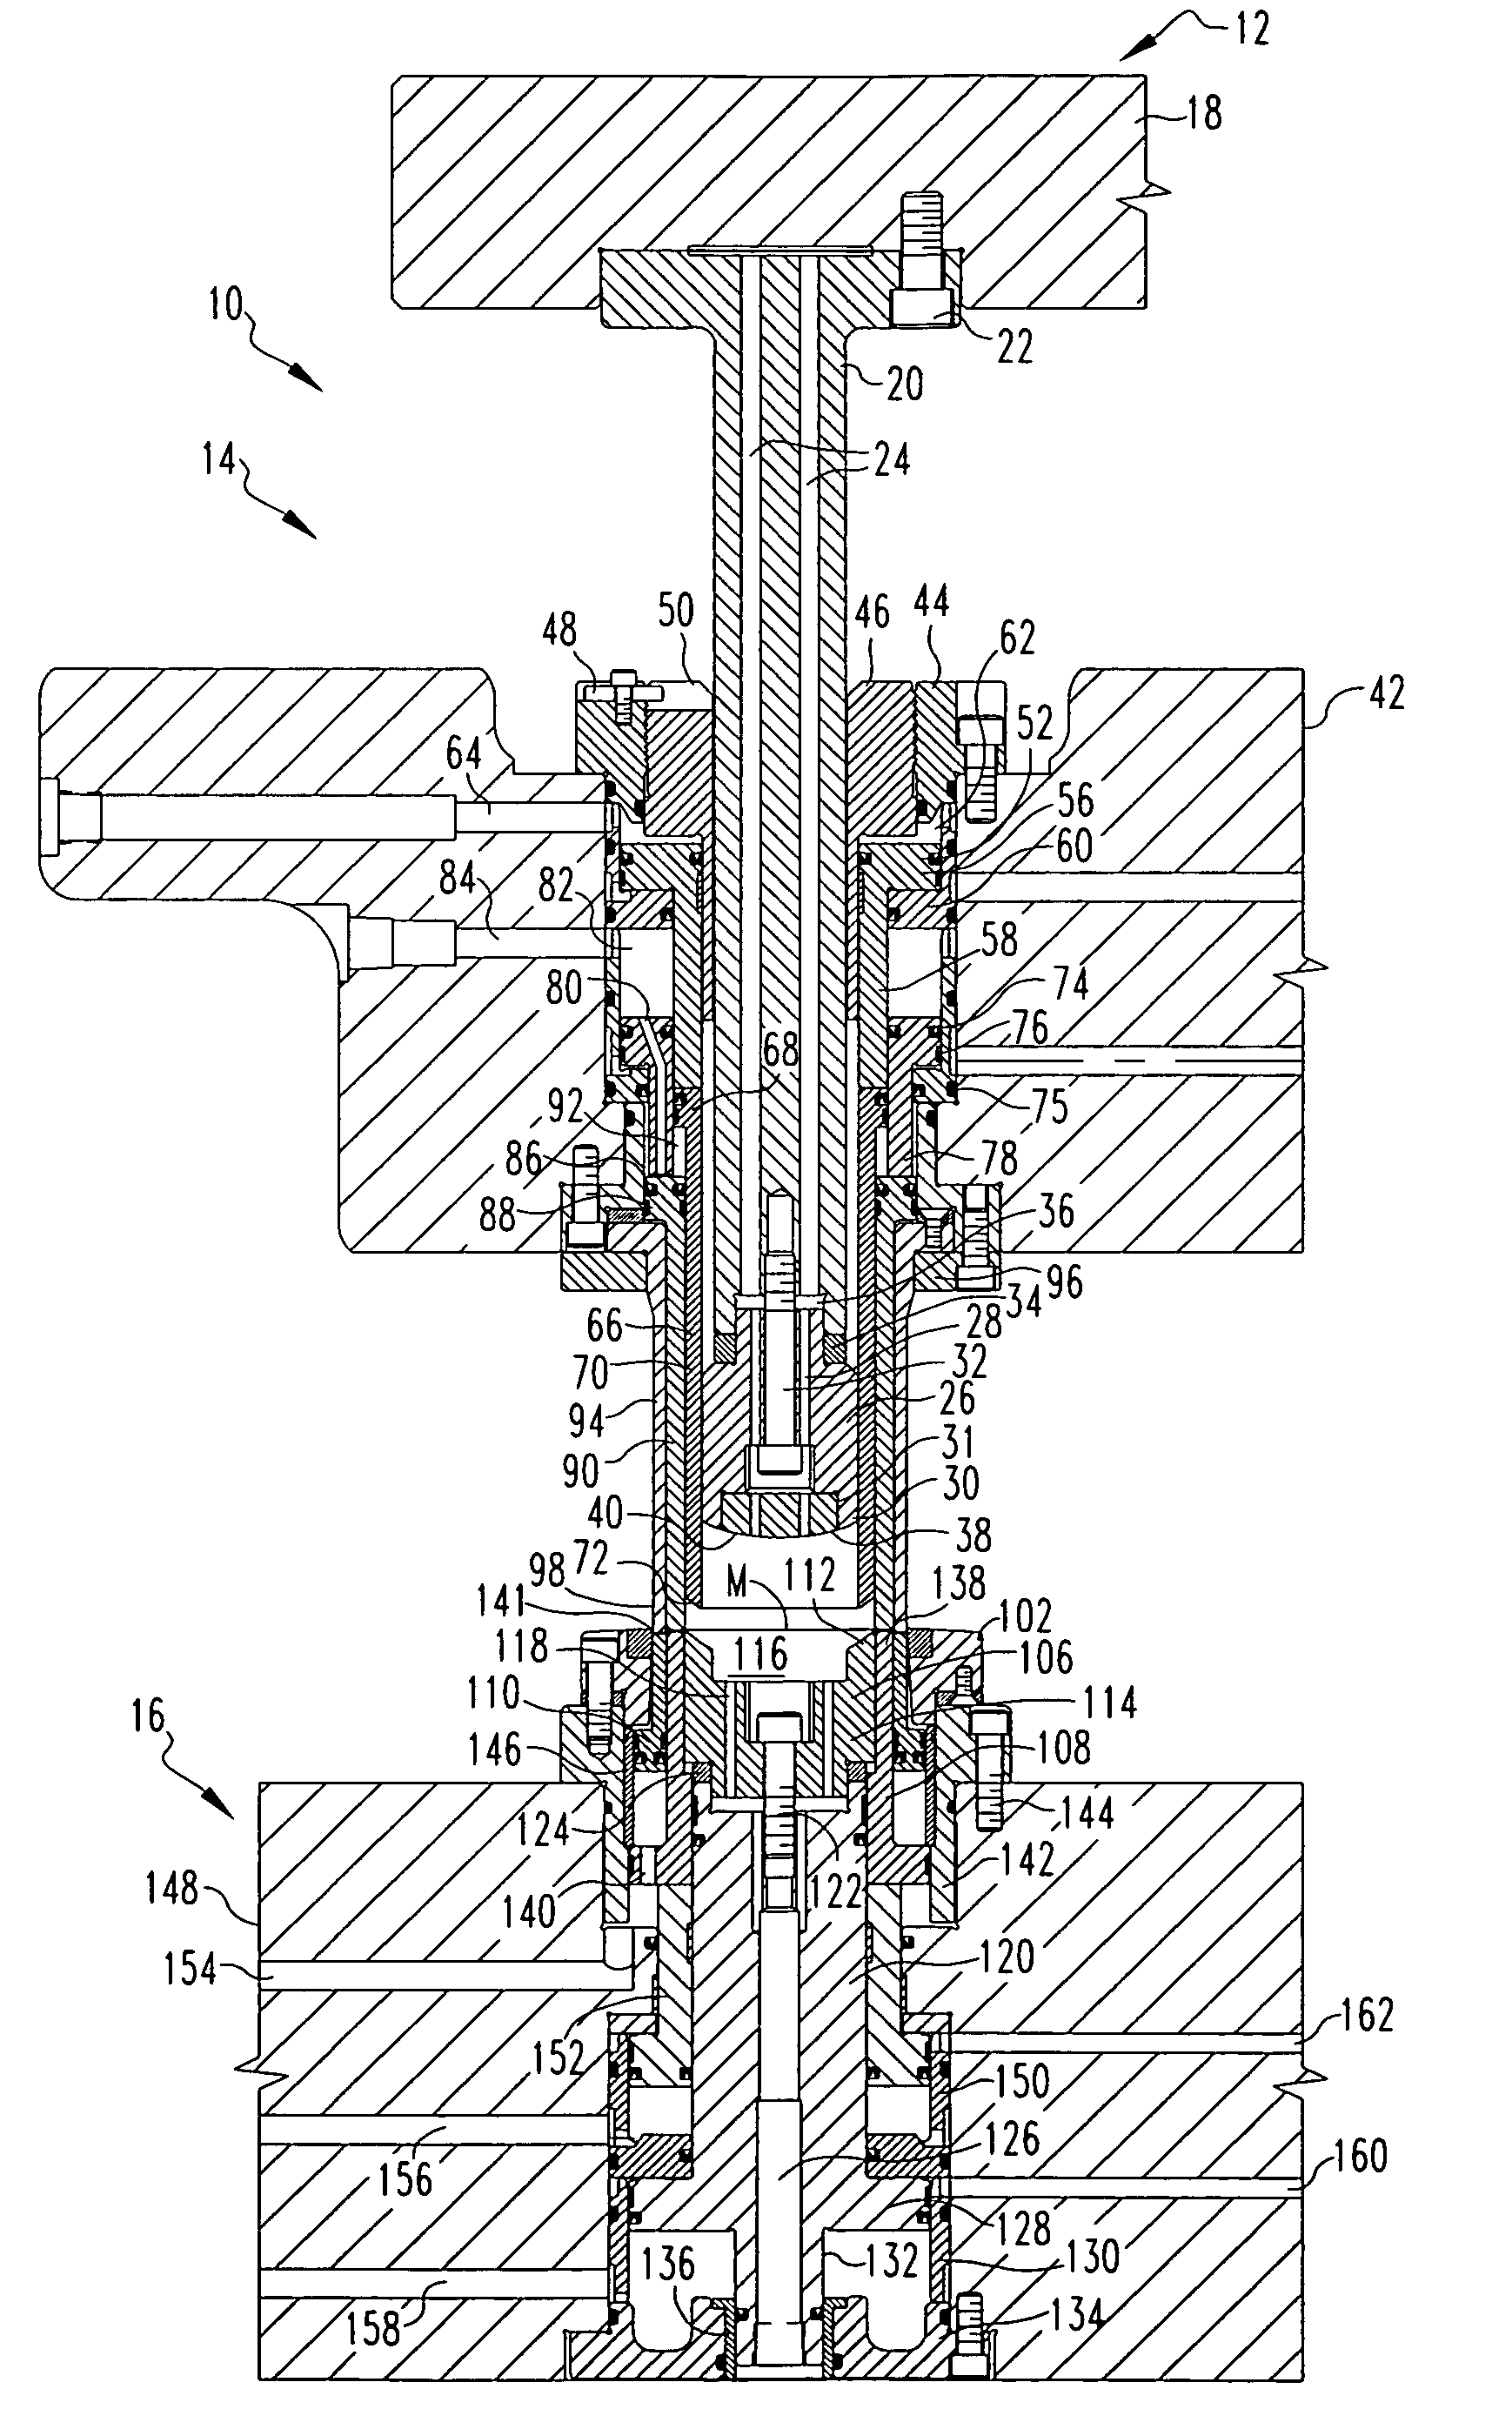 Press and method of manufacturing a can end